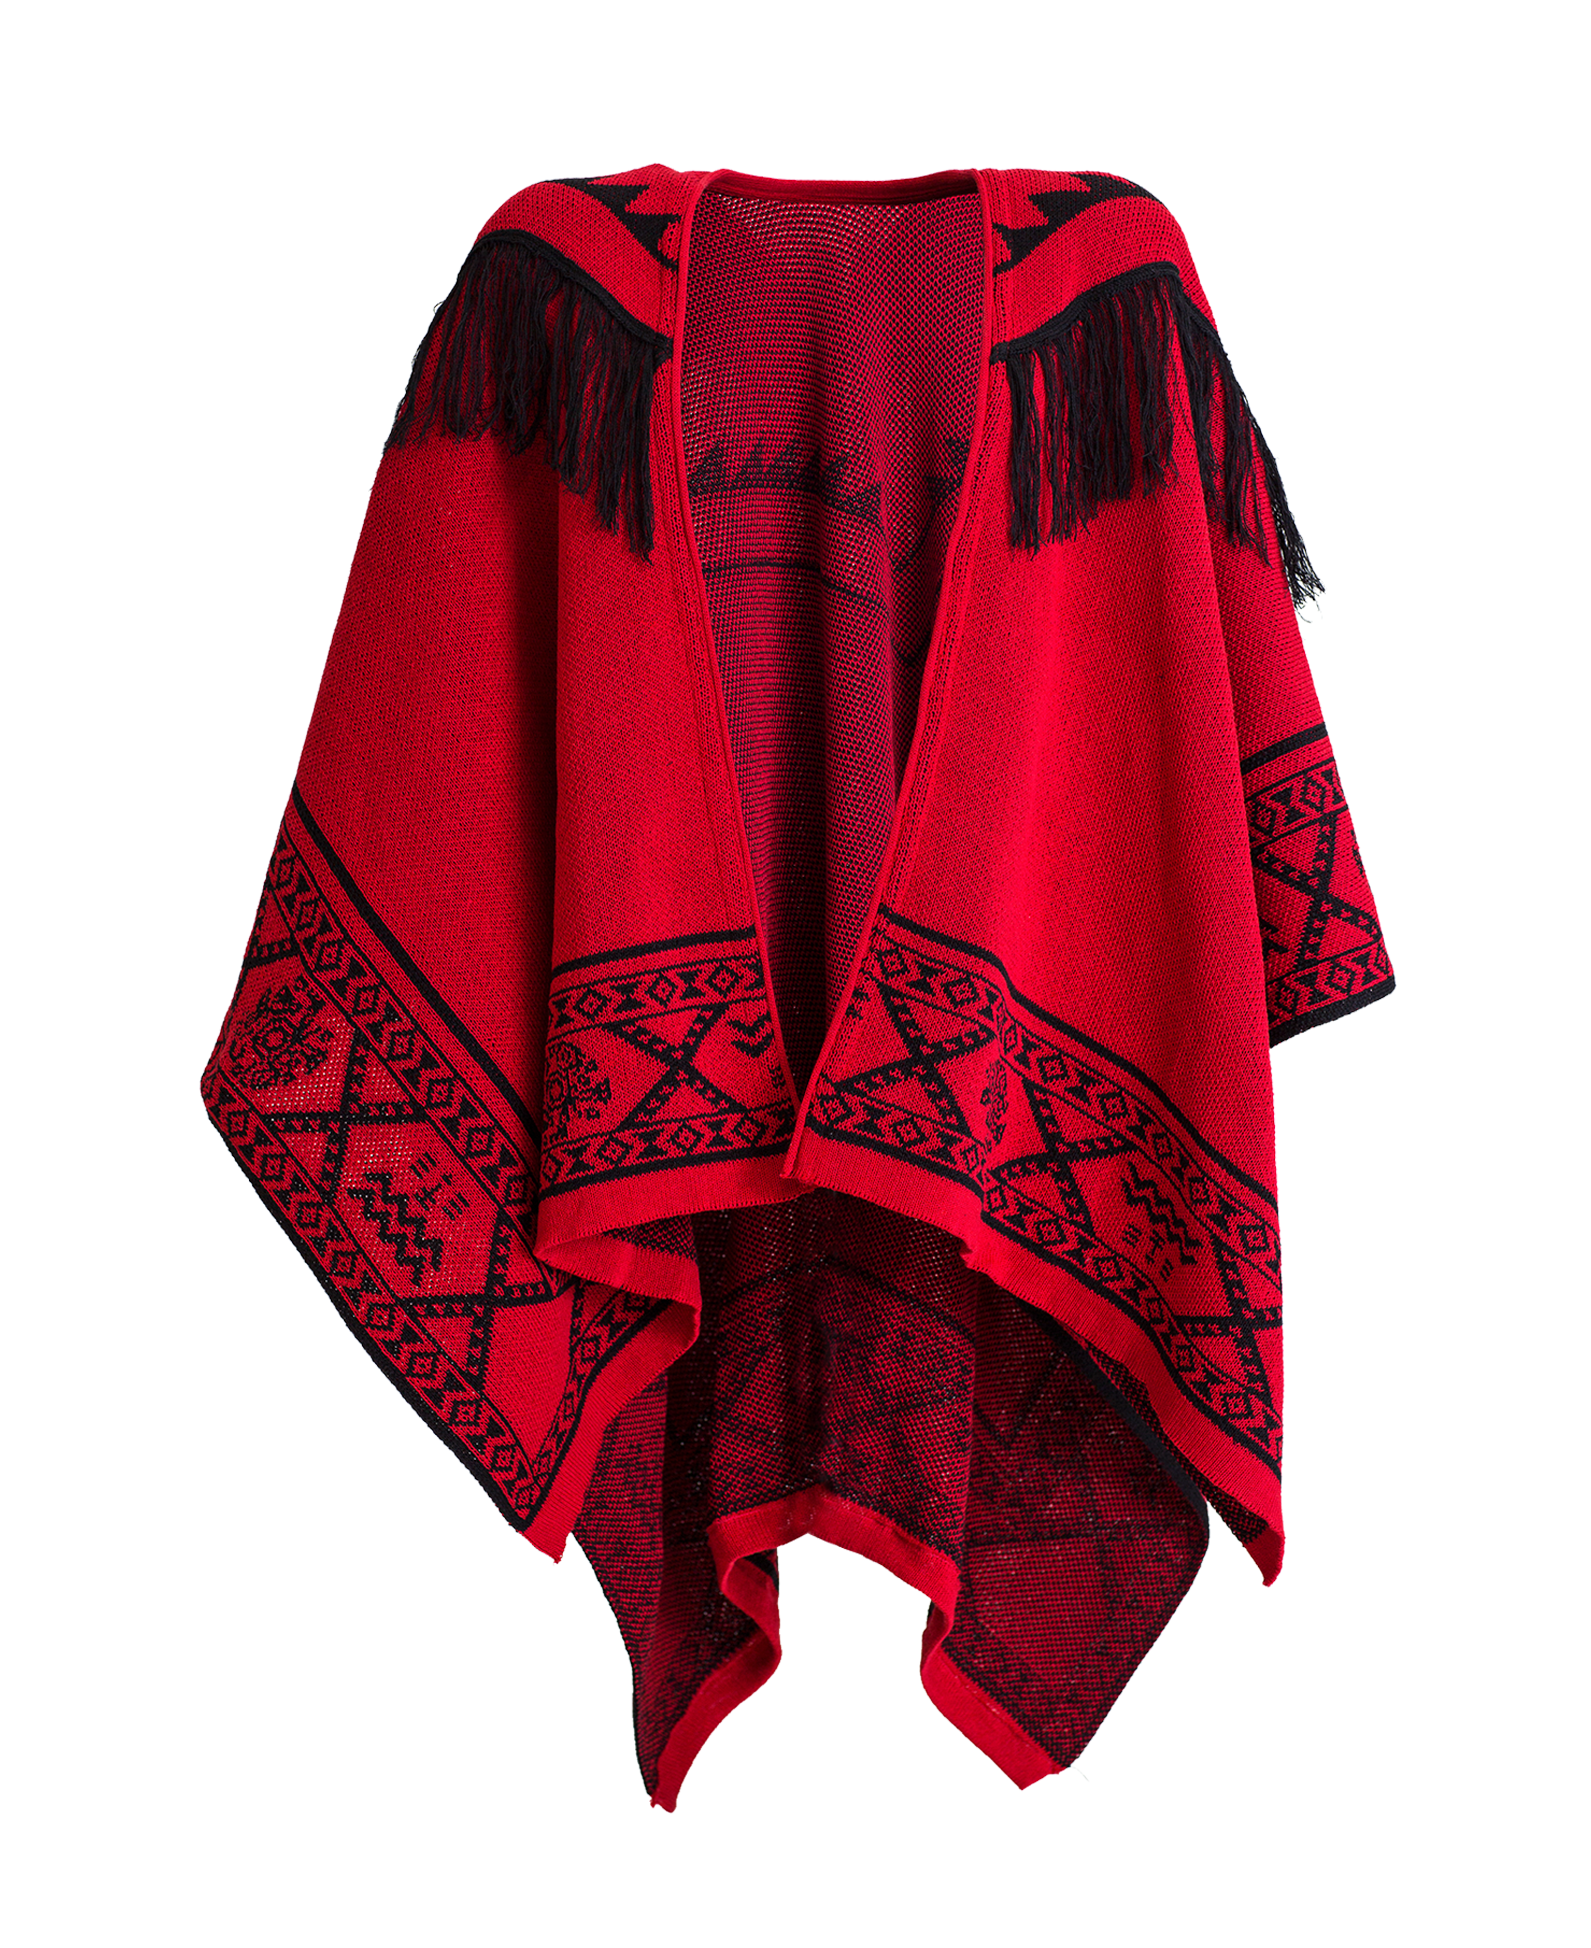 Poncho PNG Images.